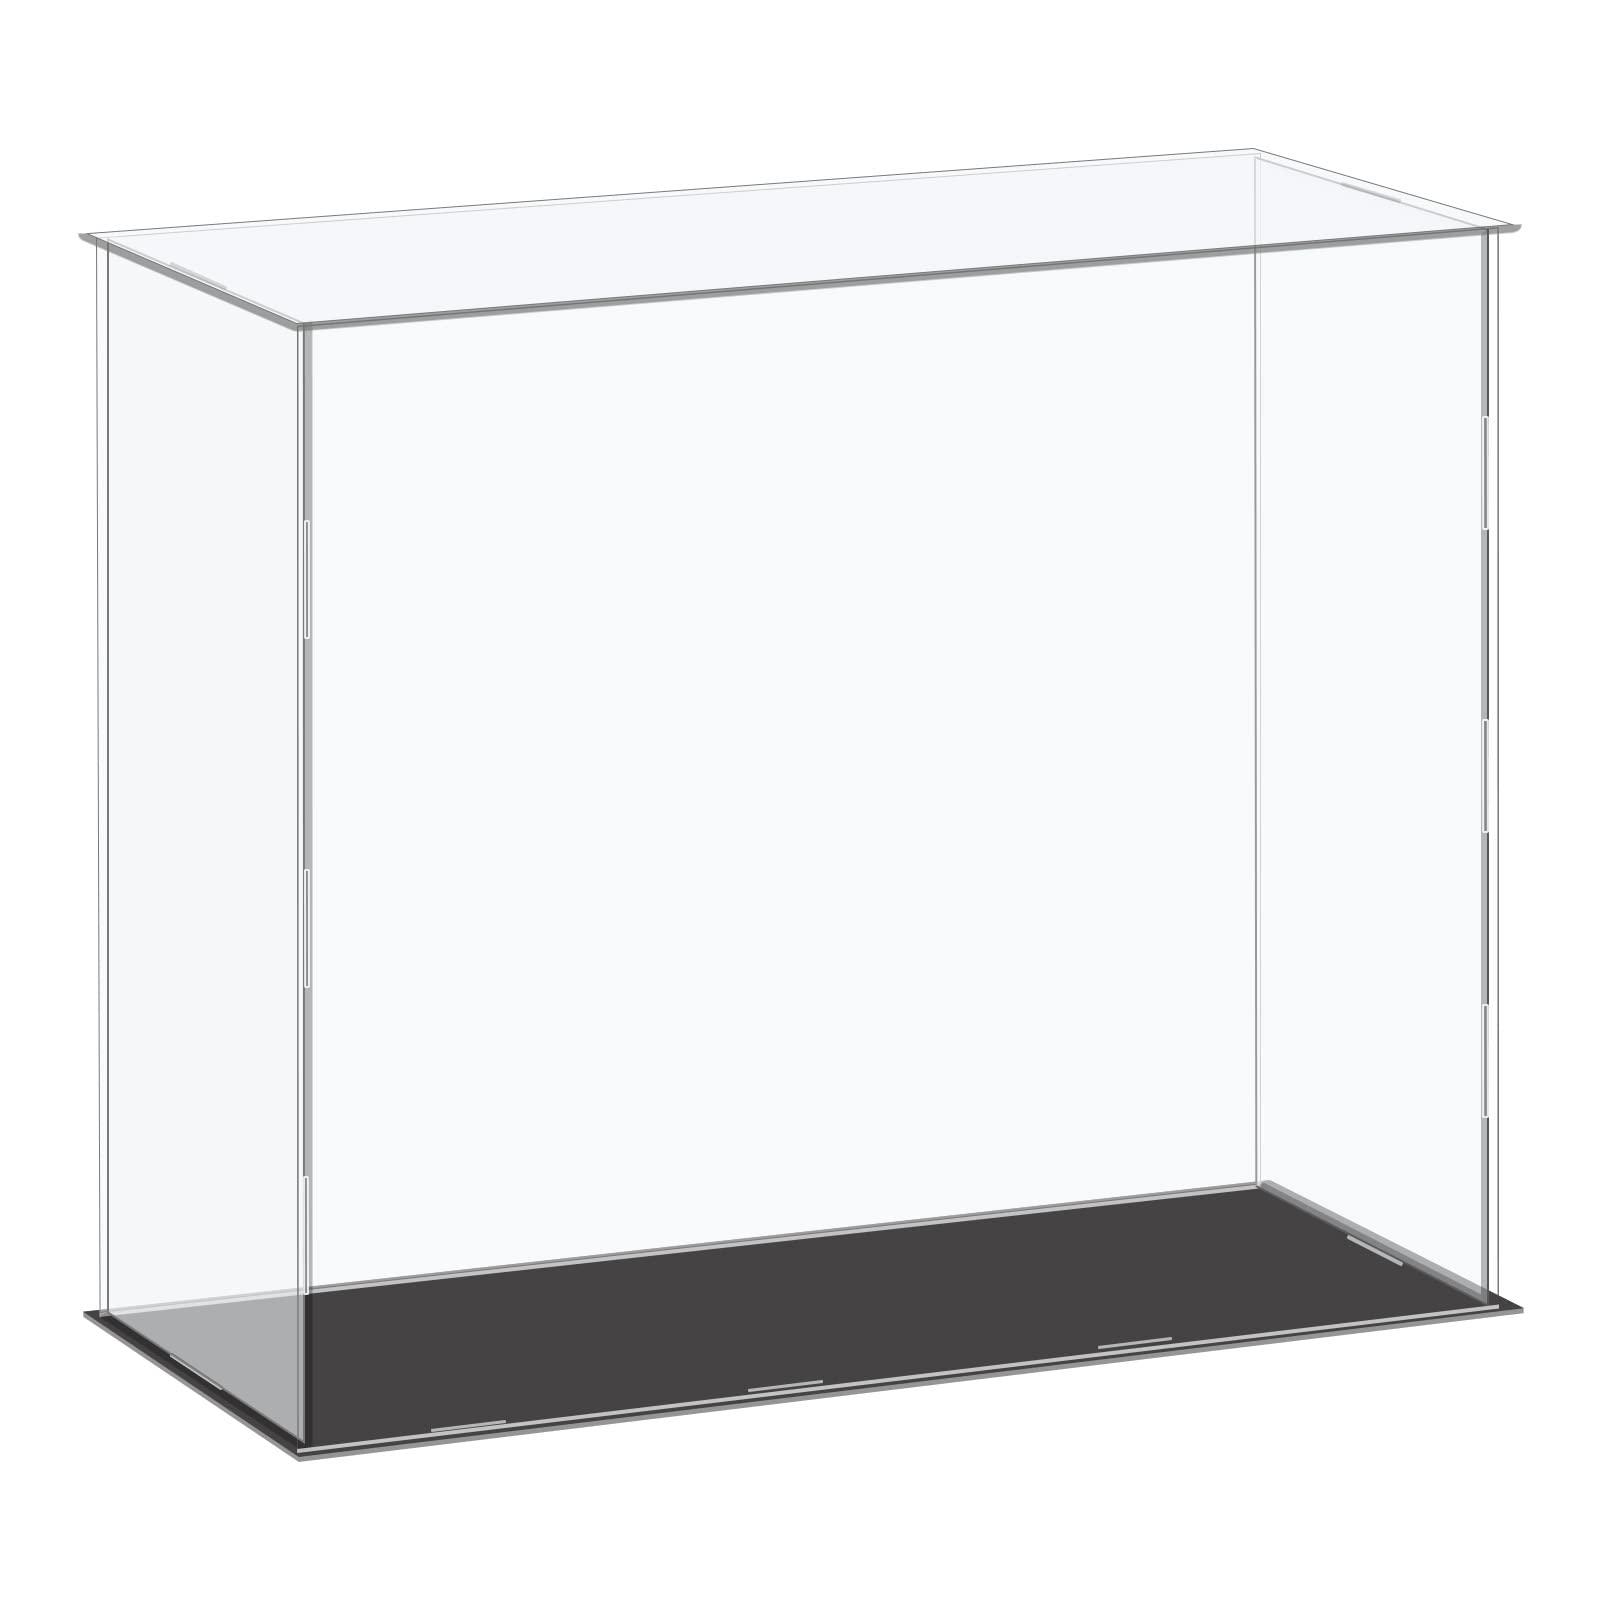 sourcing map Acrylic Display Case Plastic Box Cube Storage Box Clear Small Assemble Dustproof Showcase 41x16x35.5cm for Collectibles Items 0